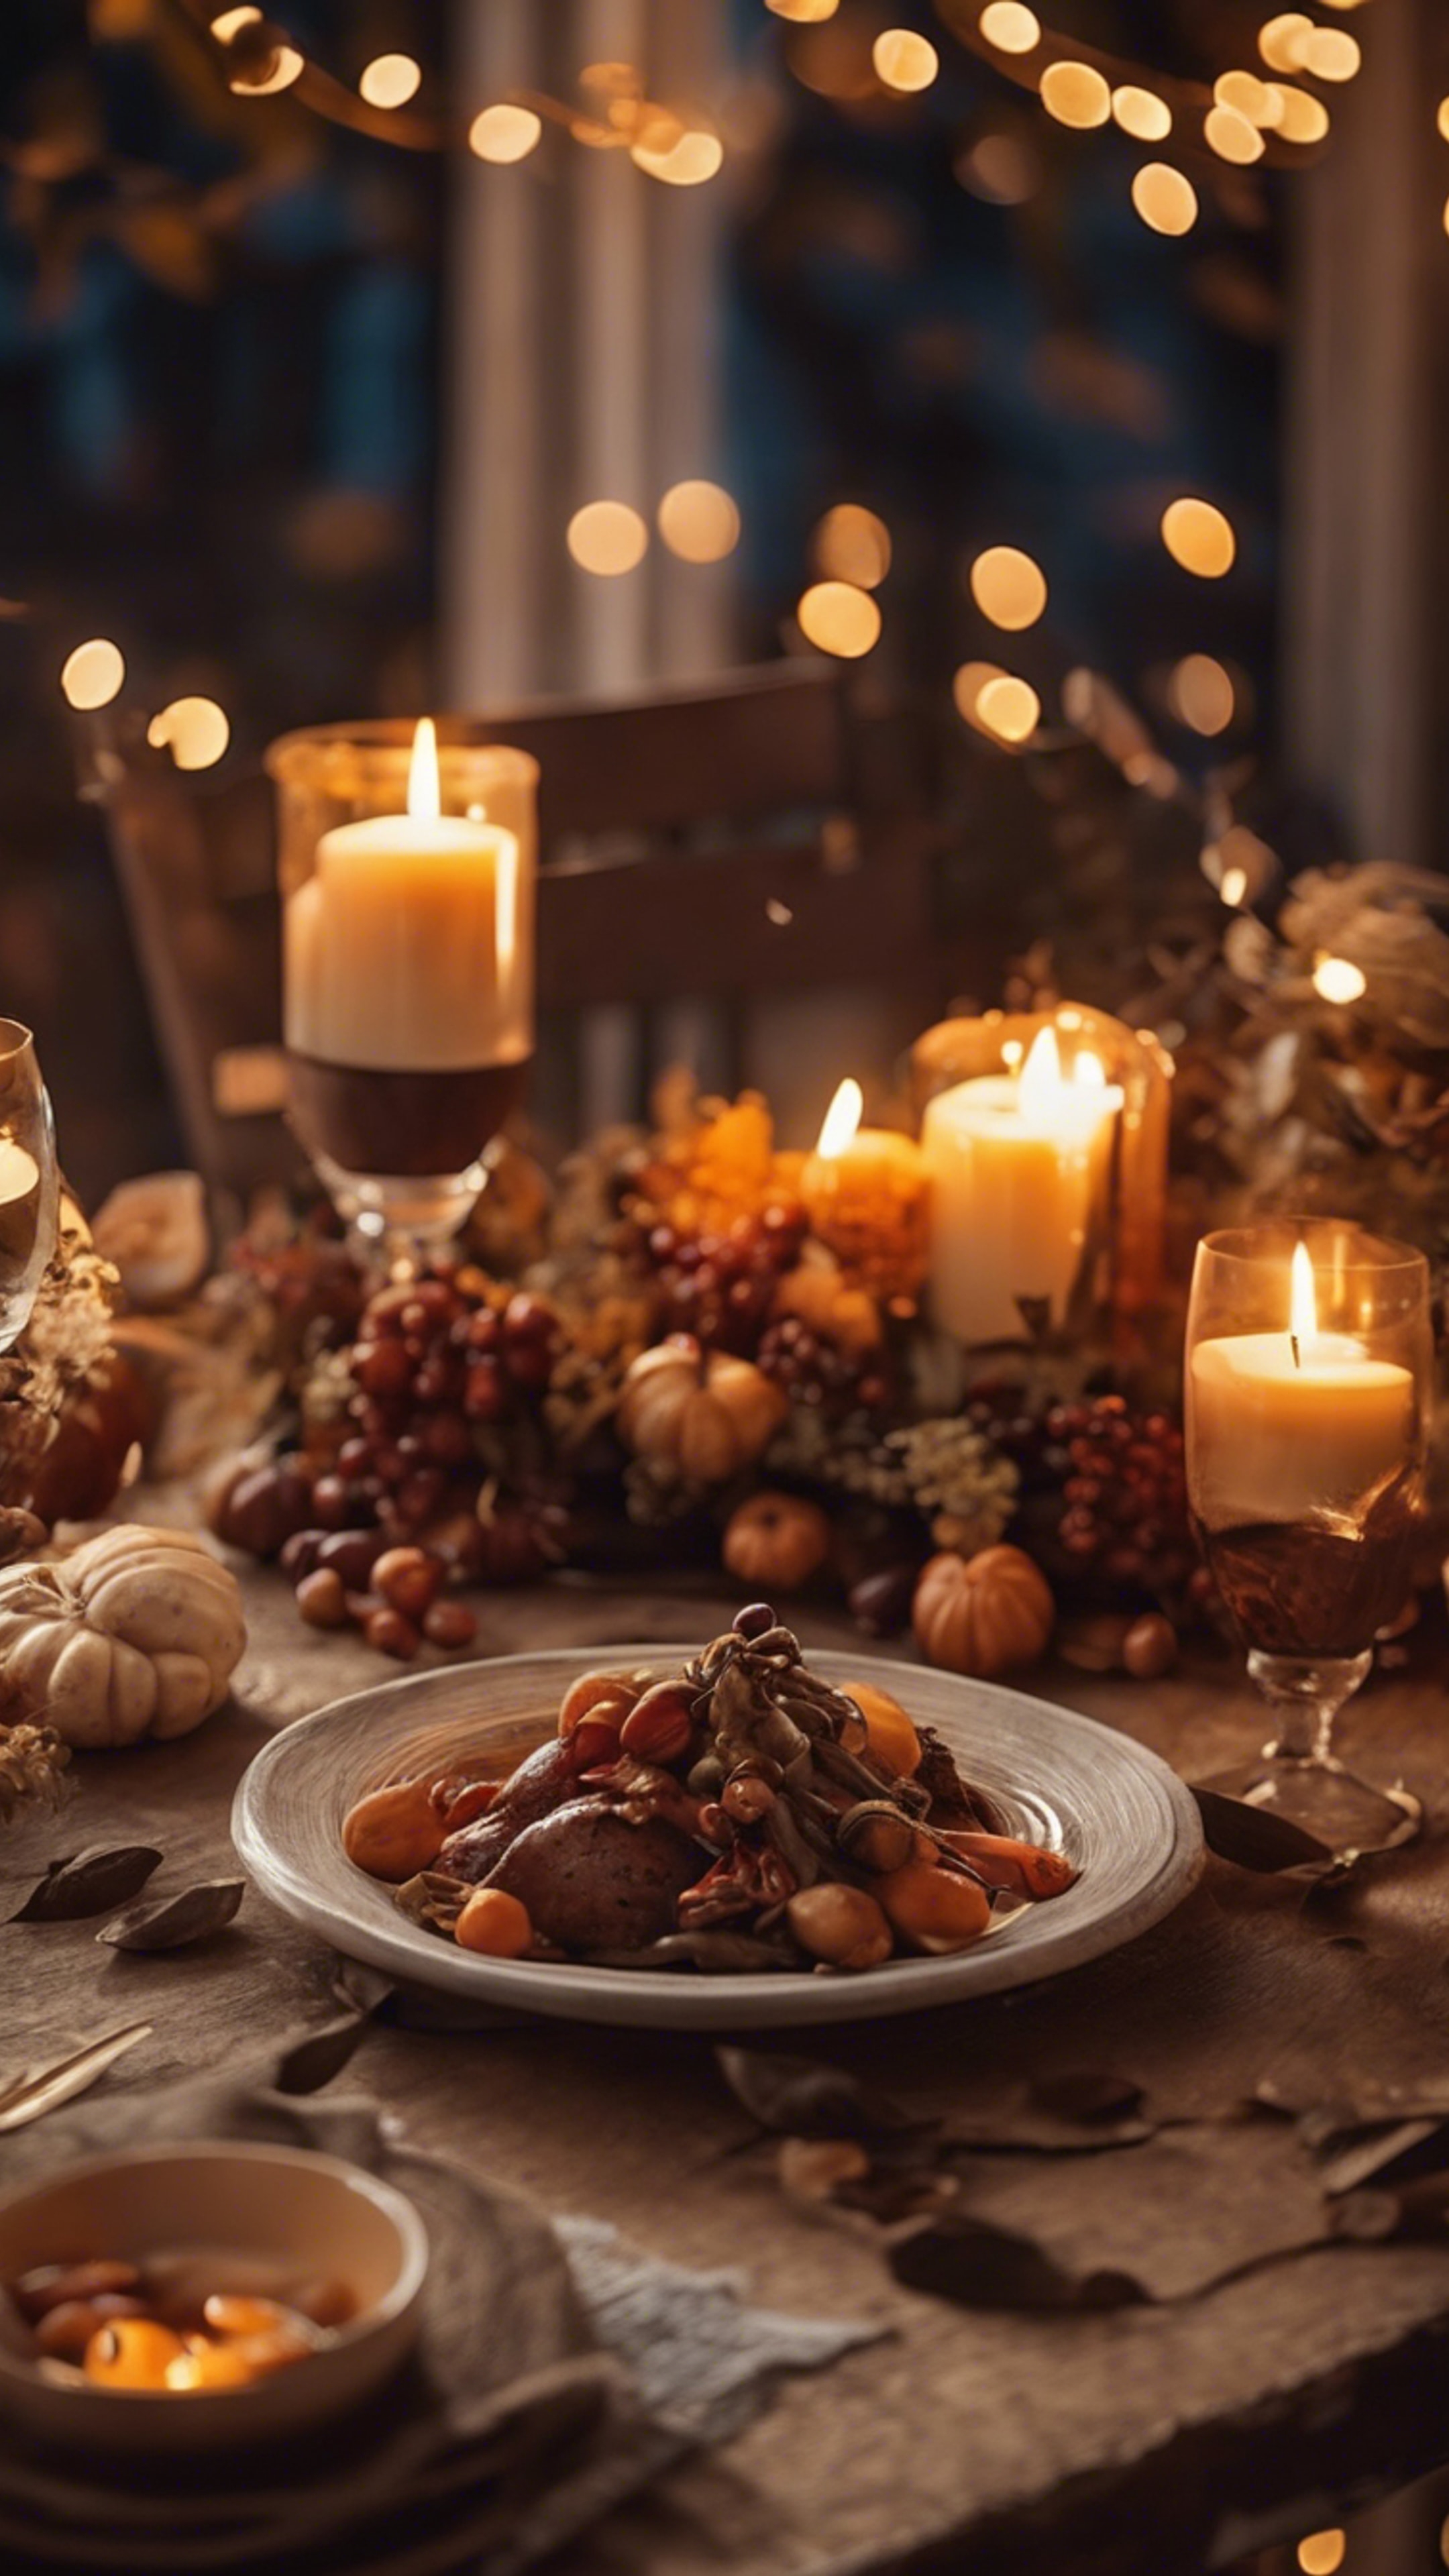 A rustic wooden table set with a Fall harvest dinner, lit by the warm glow of fairy lights and candles.壁紙[3b6dce064dd34370adfb]